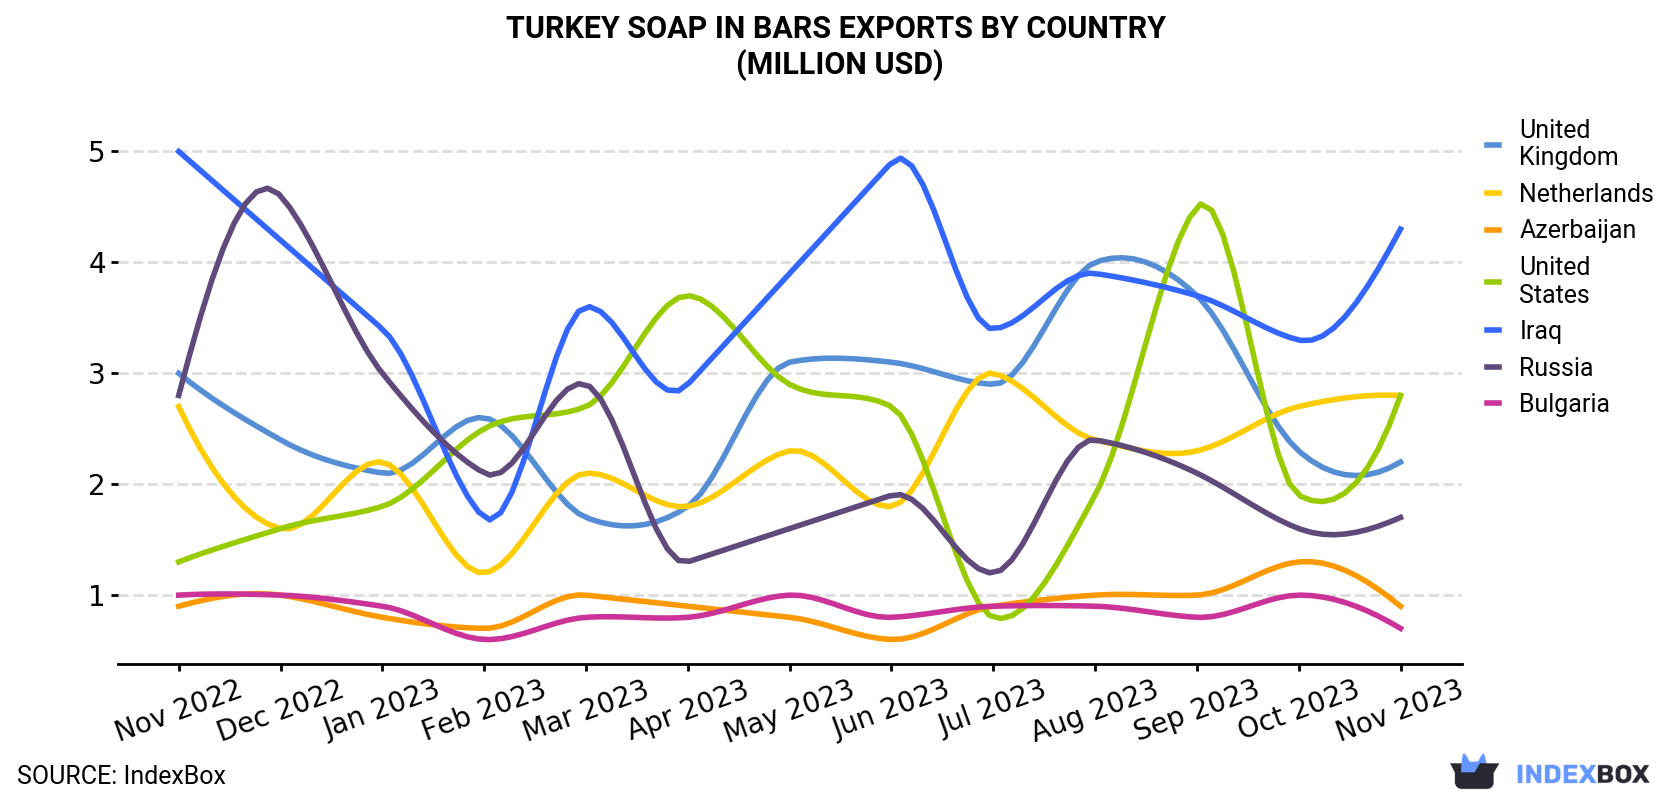 Turkey Soap In Bars Exports By Country (Million USD)